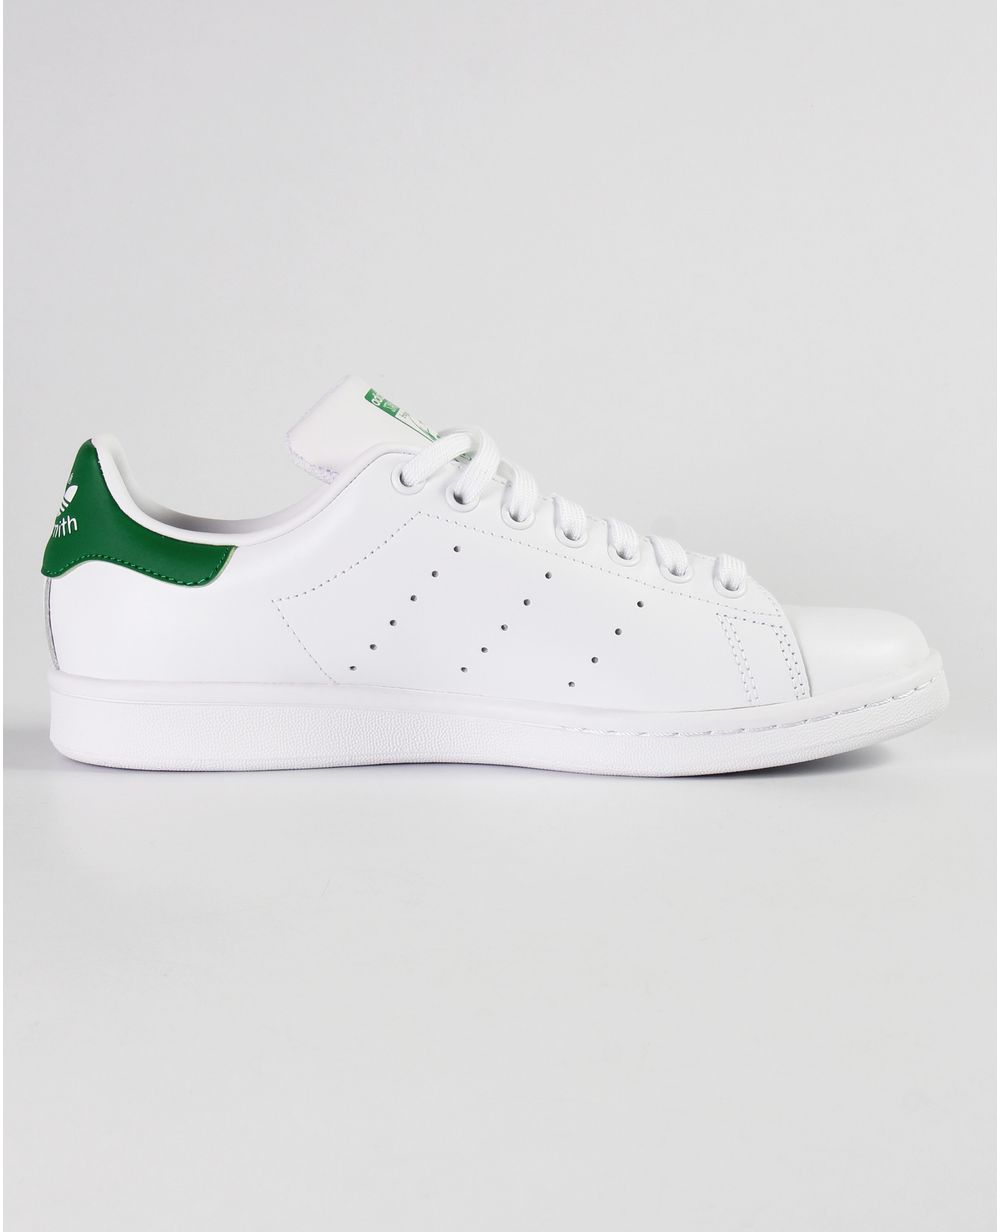 adidas stan smith chica